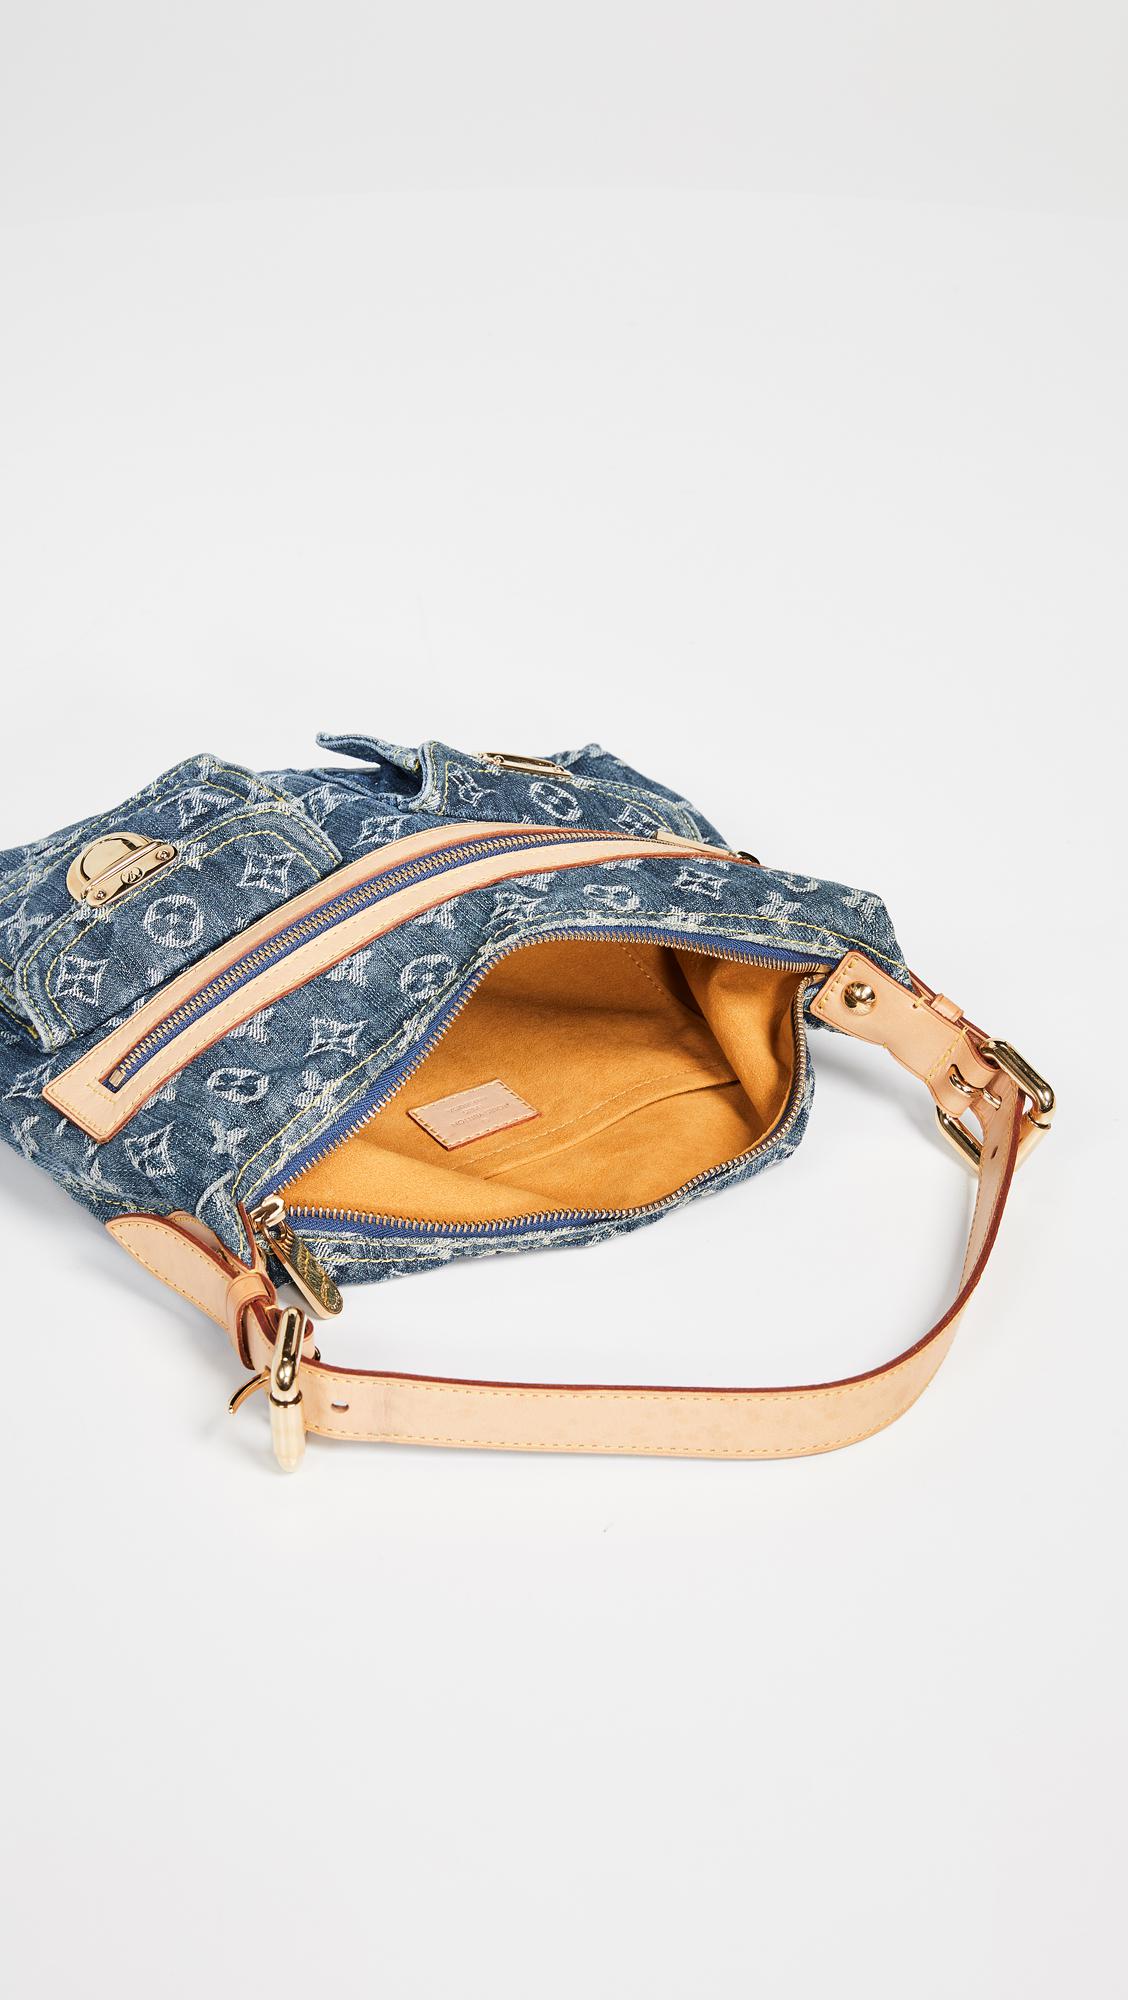 relovedeluxe products-Louis Vuitton Denim Baggy GM Shoulder Bag